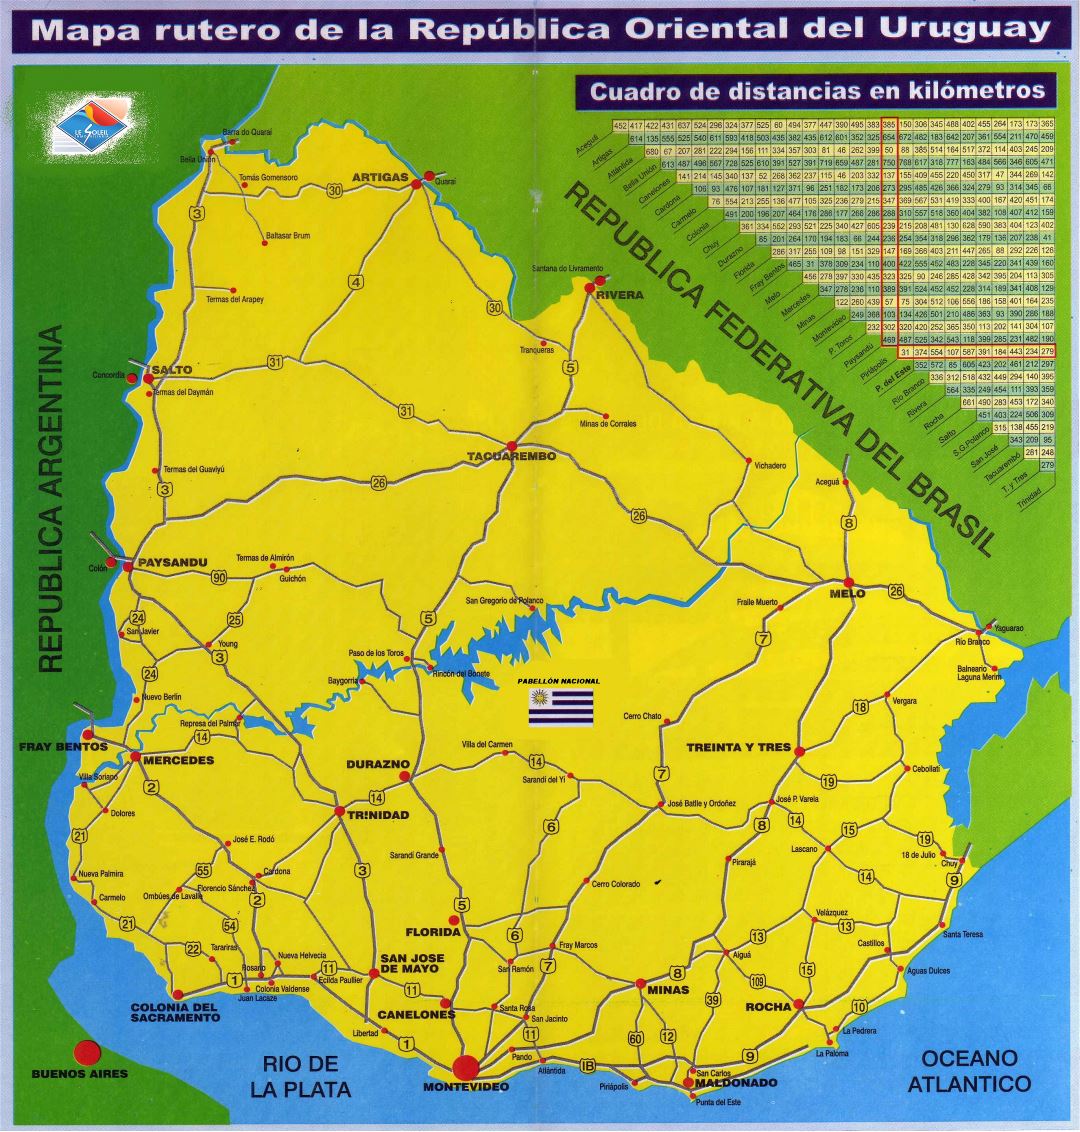 Large scale road map of Uruguay